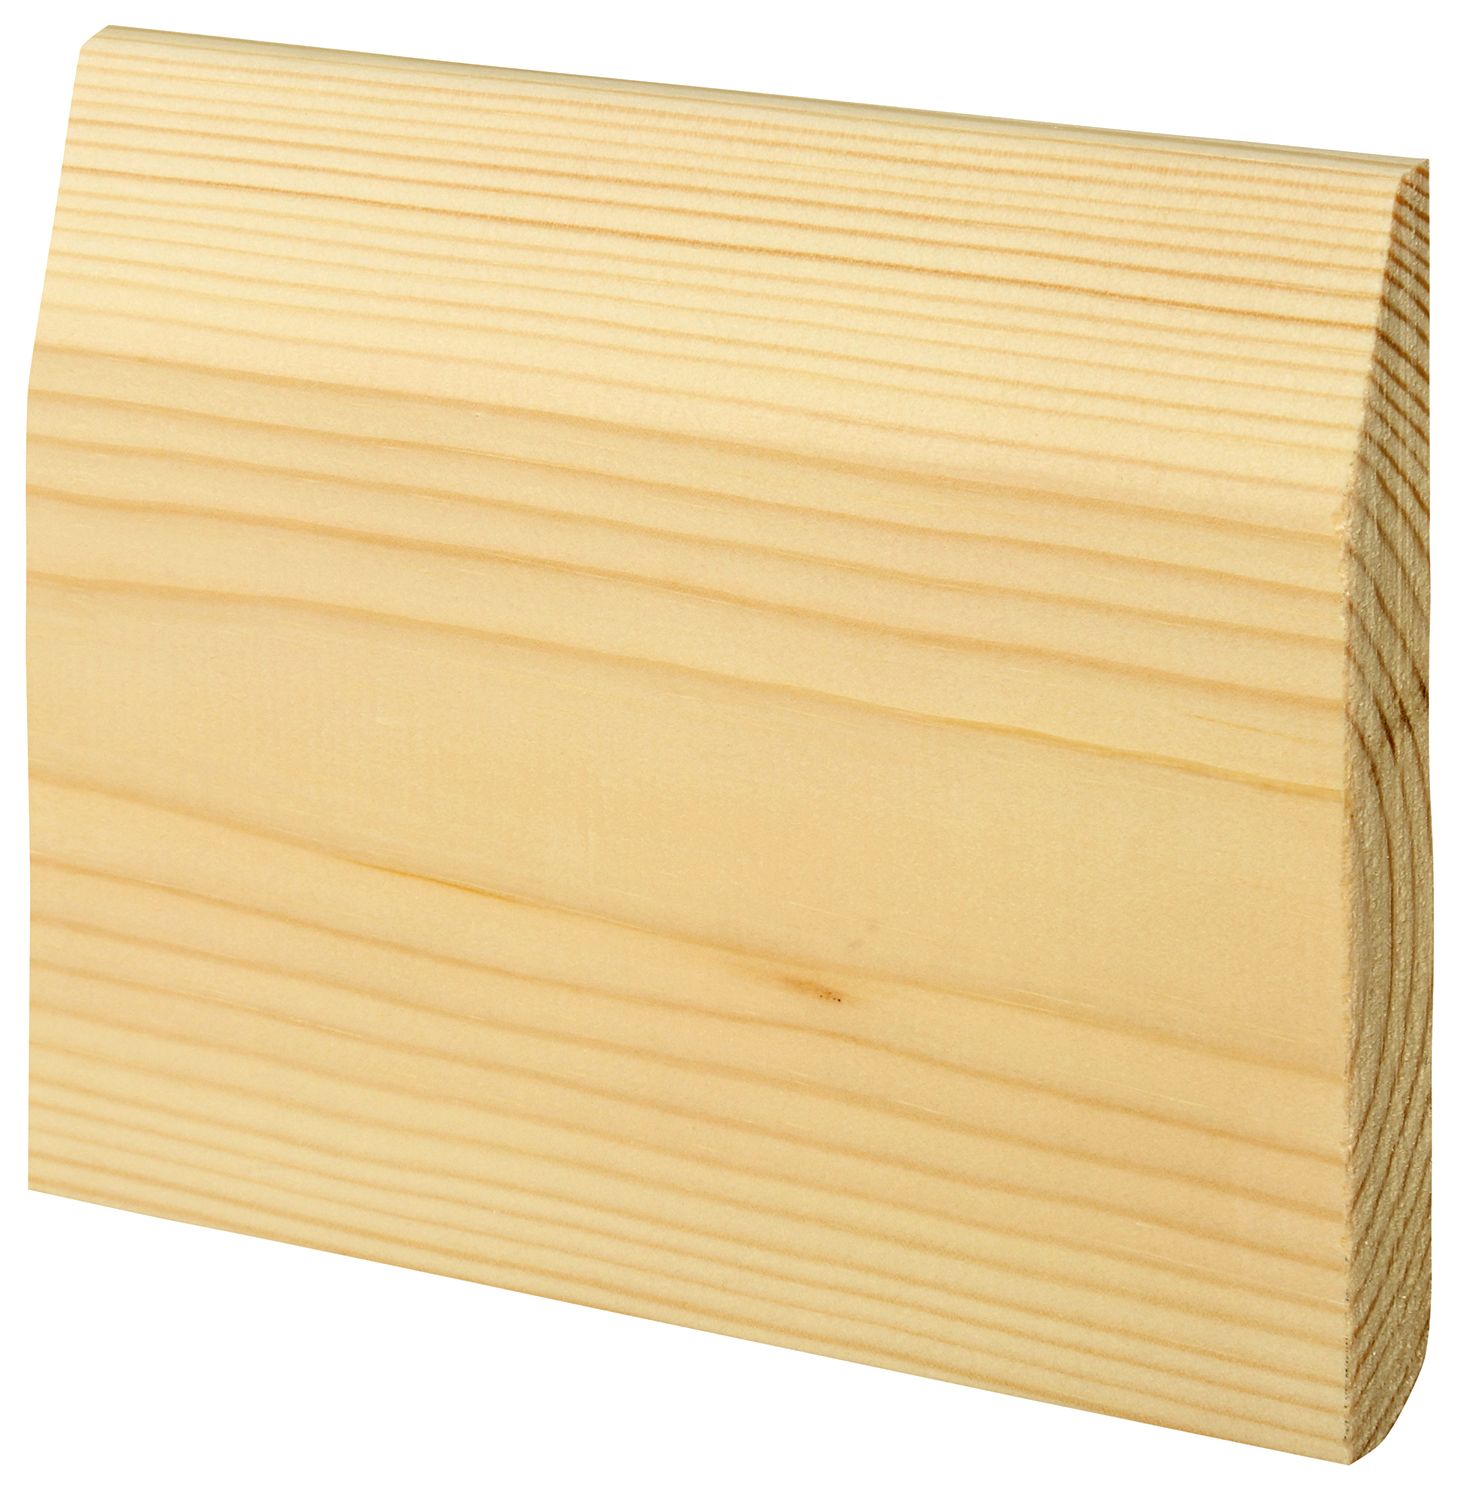 Image of Wickes Dual Purpose Chamfered/Bullnose Pine Skirting 19 x 119 x 2400 mm